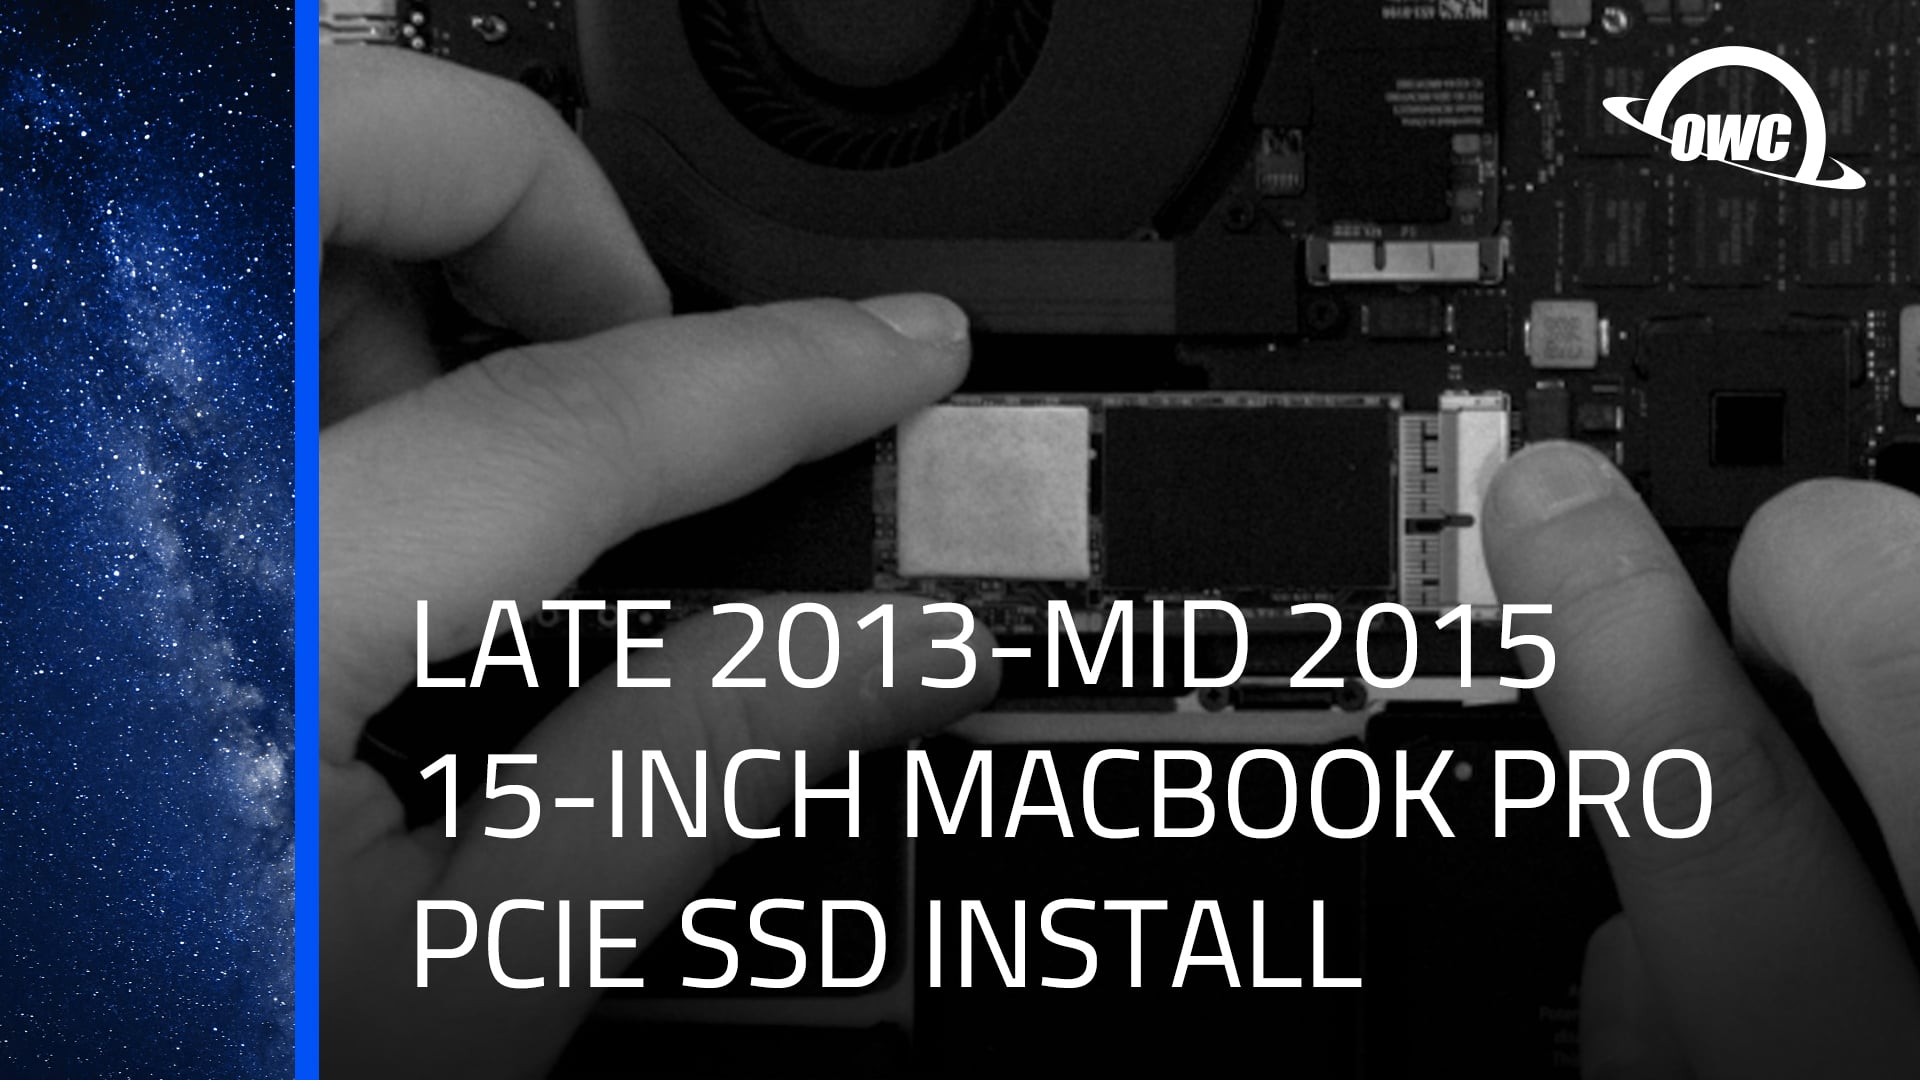 How to Upgrade the PCIe SSD in a 15-inch MacBook Pro Retina display (Late 2013 - Mid 2015) on Vimeo